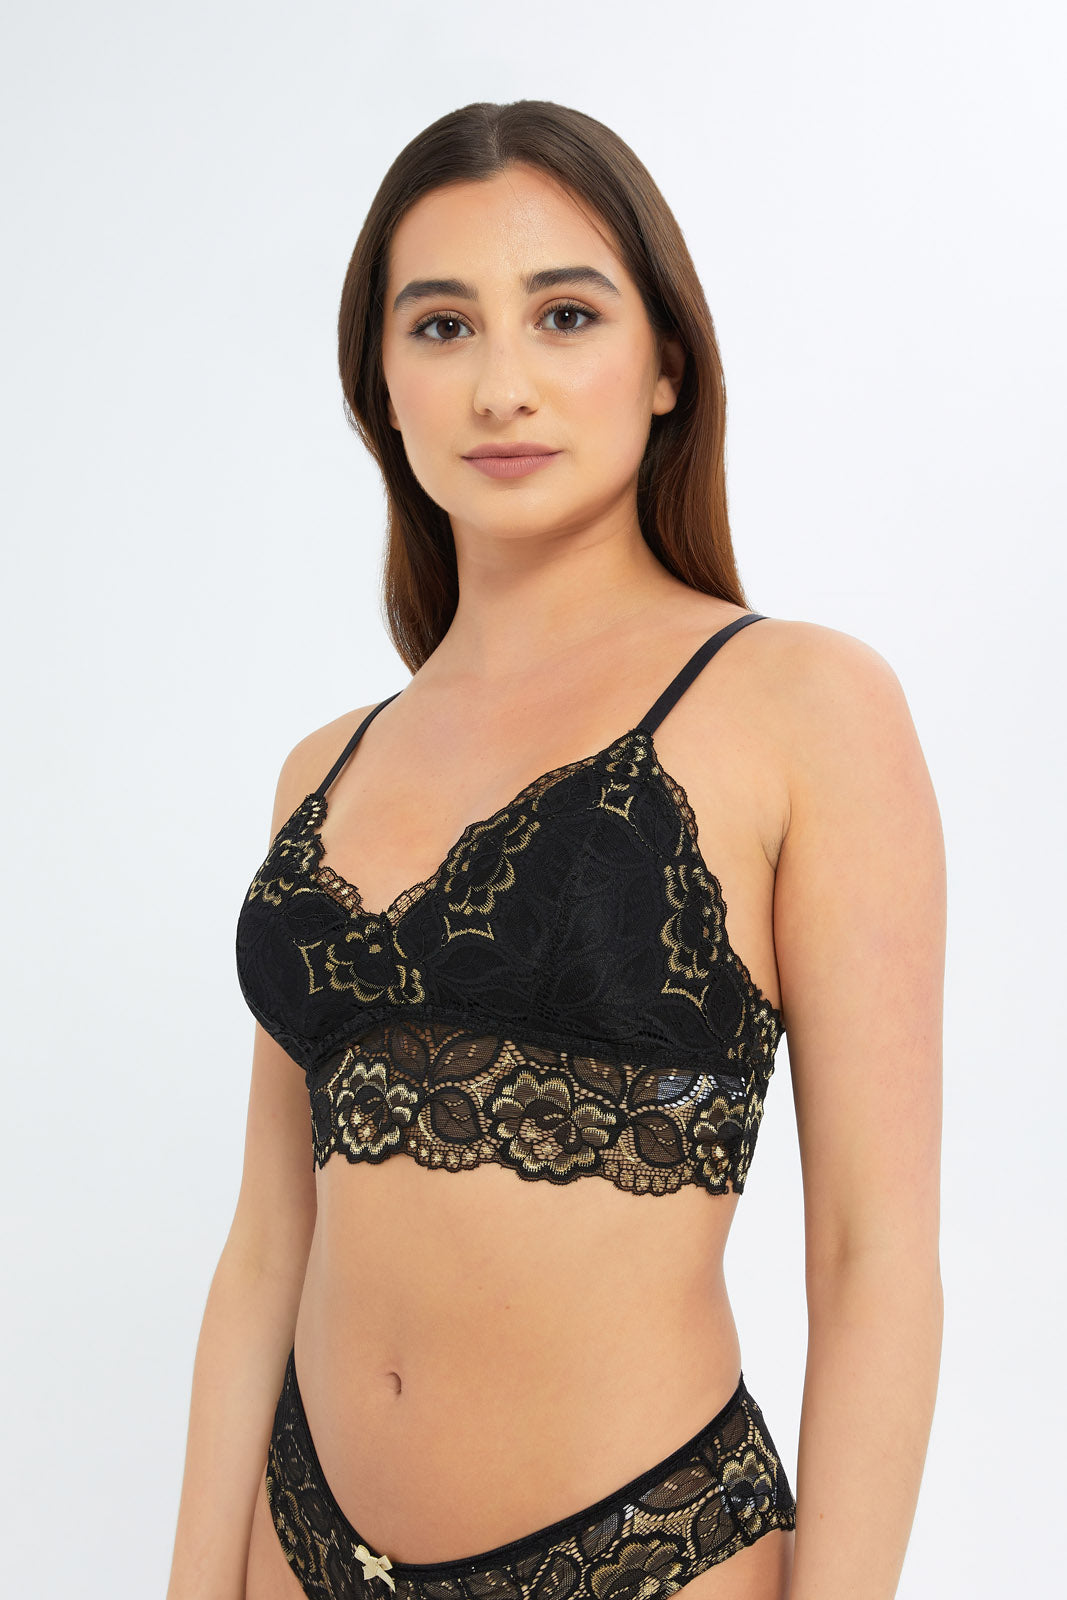 http://sa.redtagfashion.com/cdn/shop/products/125246274_1_Black_20And_20Gold_20Lace_20Non_20Wired_20Bra_20Single.jpg?v=1678796473